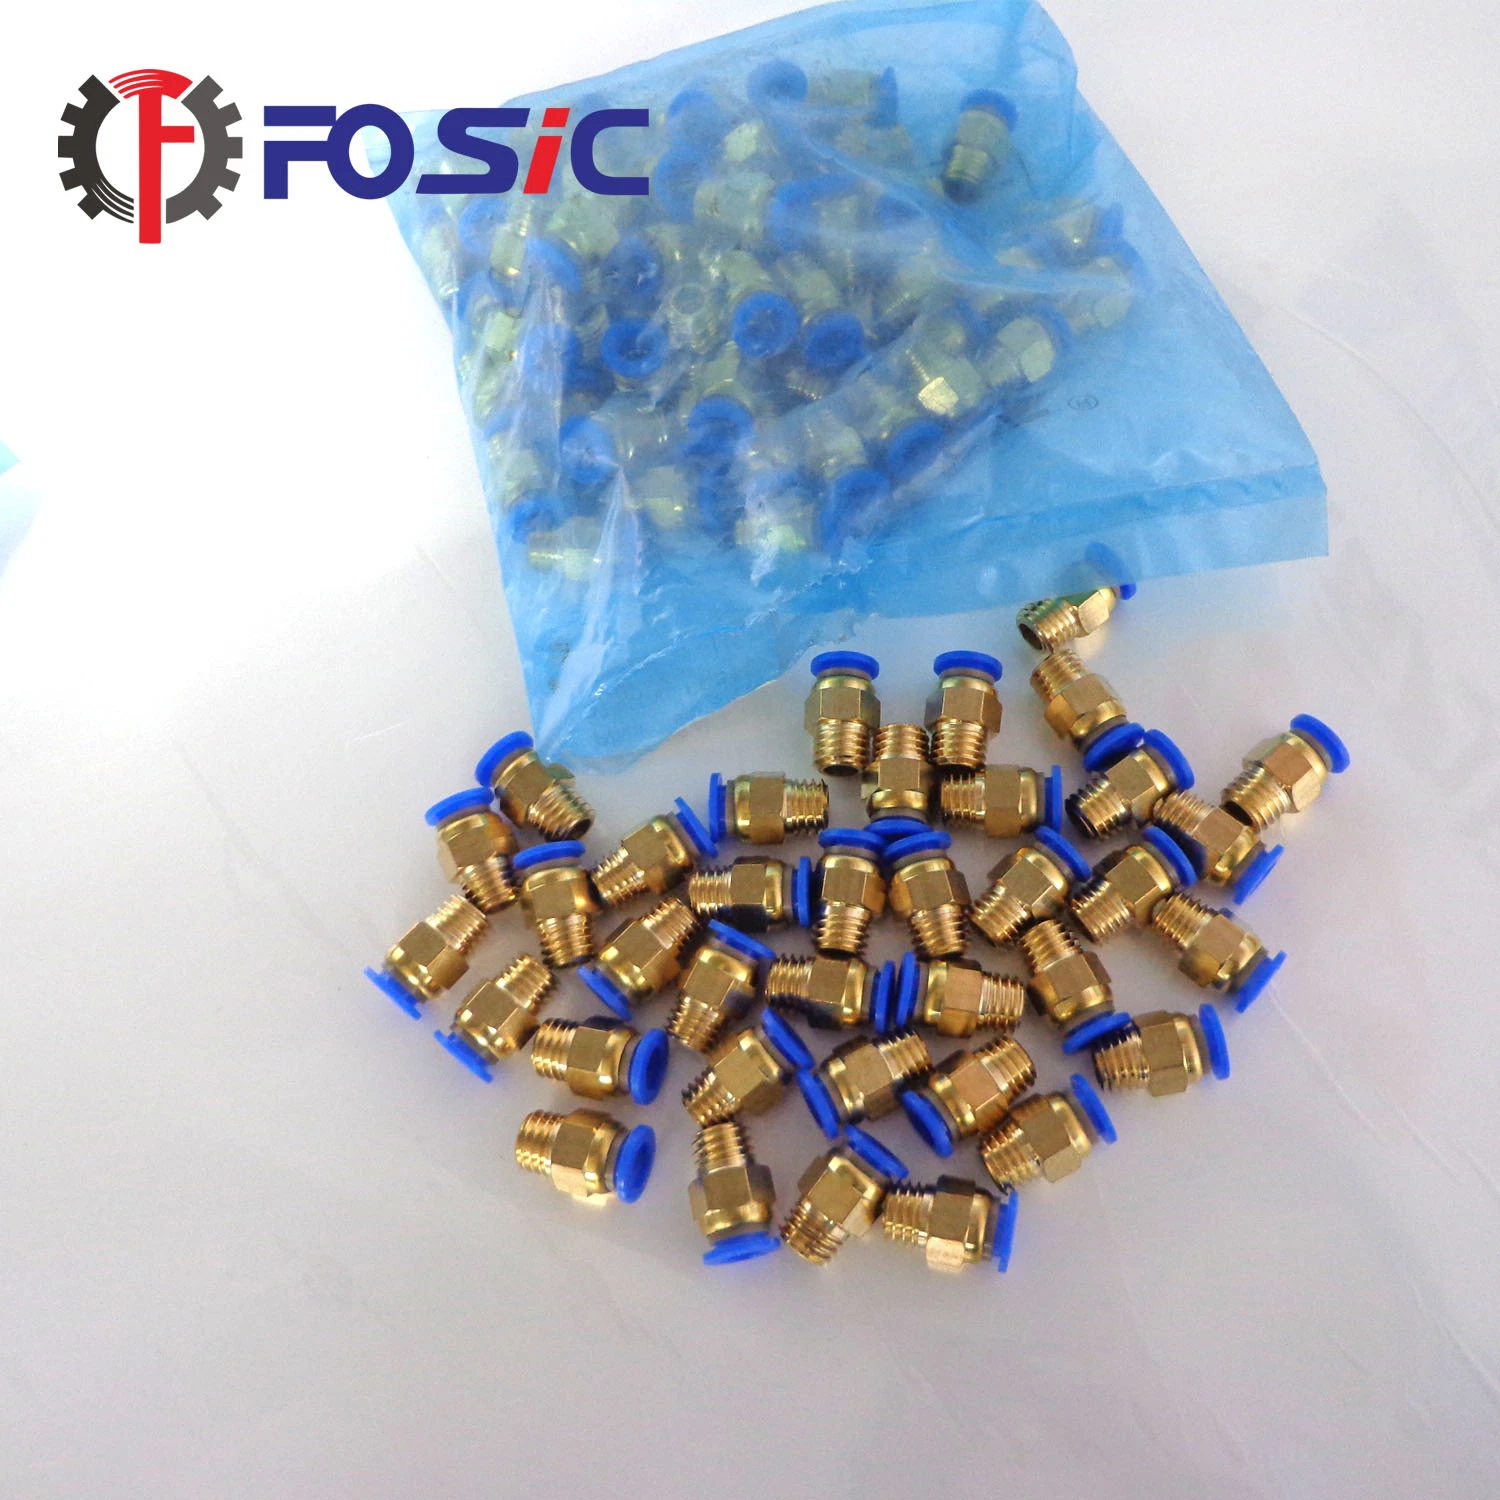 Durable in Use Copper Muffler Head Quick Pneumatic Muffler Noise Connector Tube Fitting